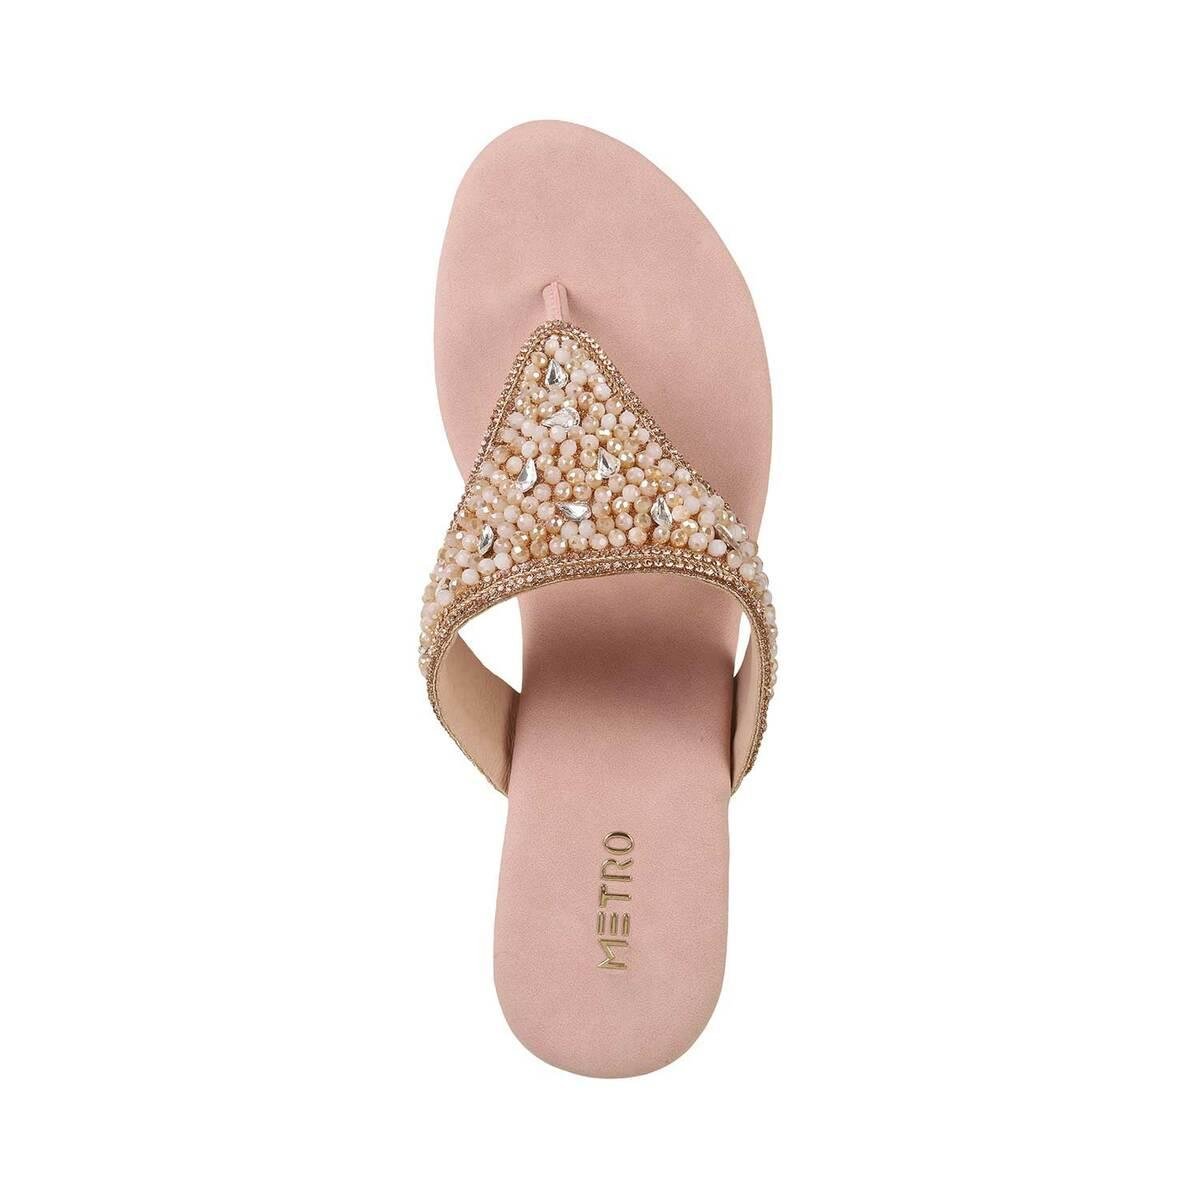 Ladies' Party Sandals And Diamond Bags - Zaassk